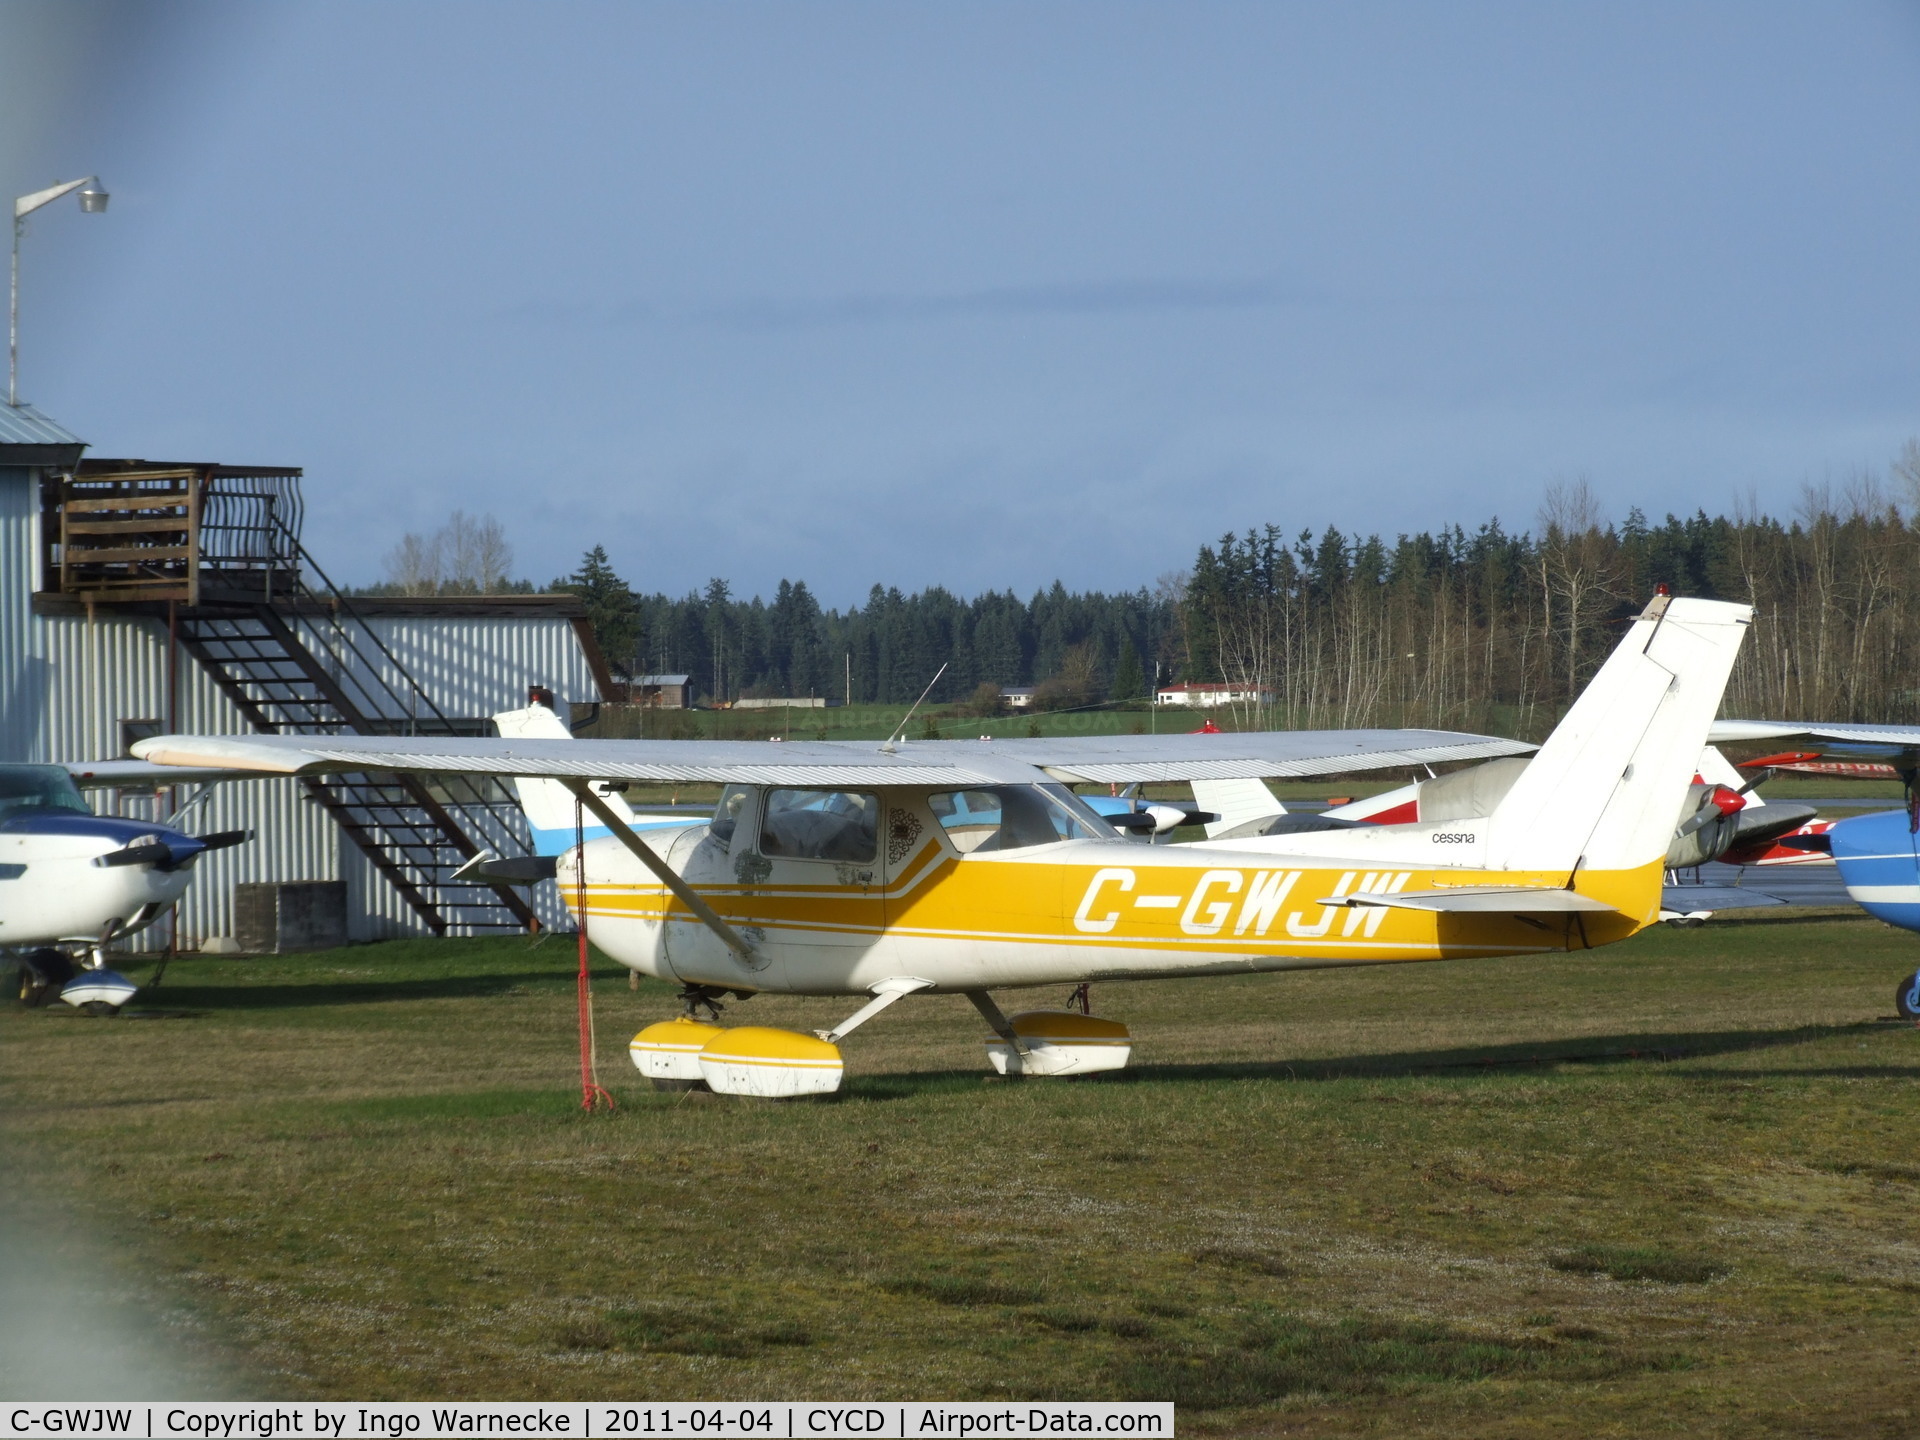 C-GWJW, 1975 Cessna 150M C/N 15076603, Cessna 150M at Nanaimo Airport, Cassidy BC